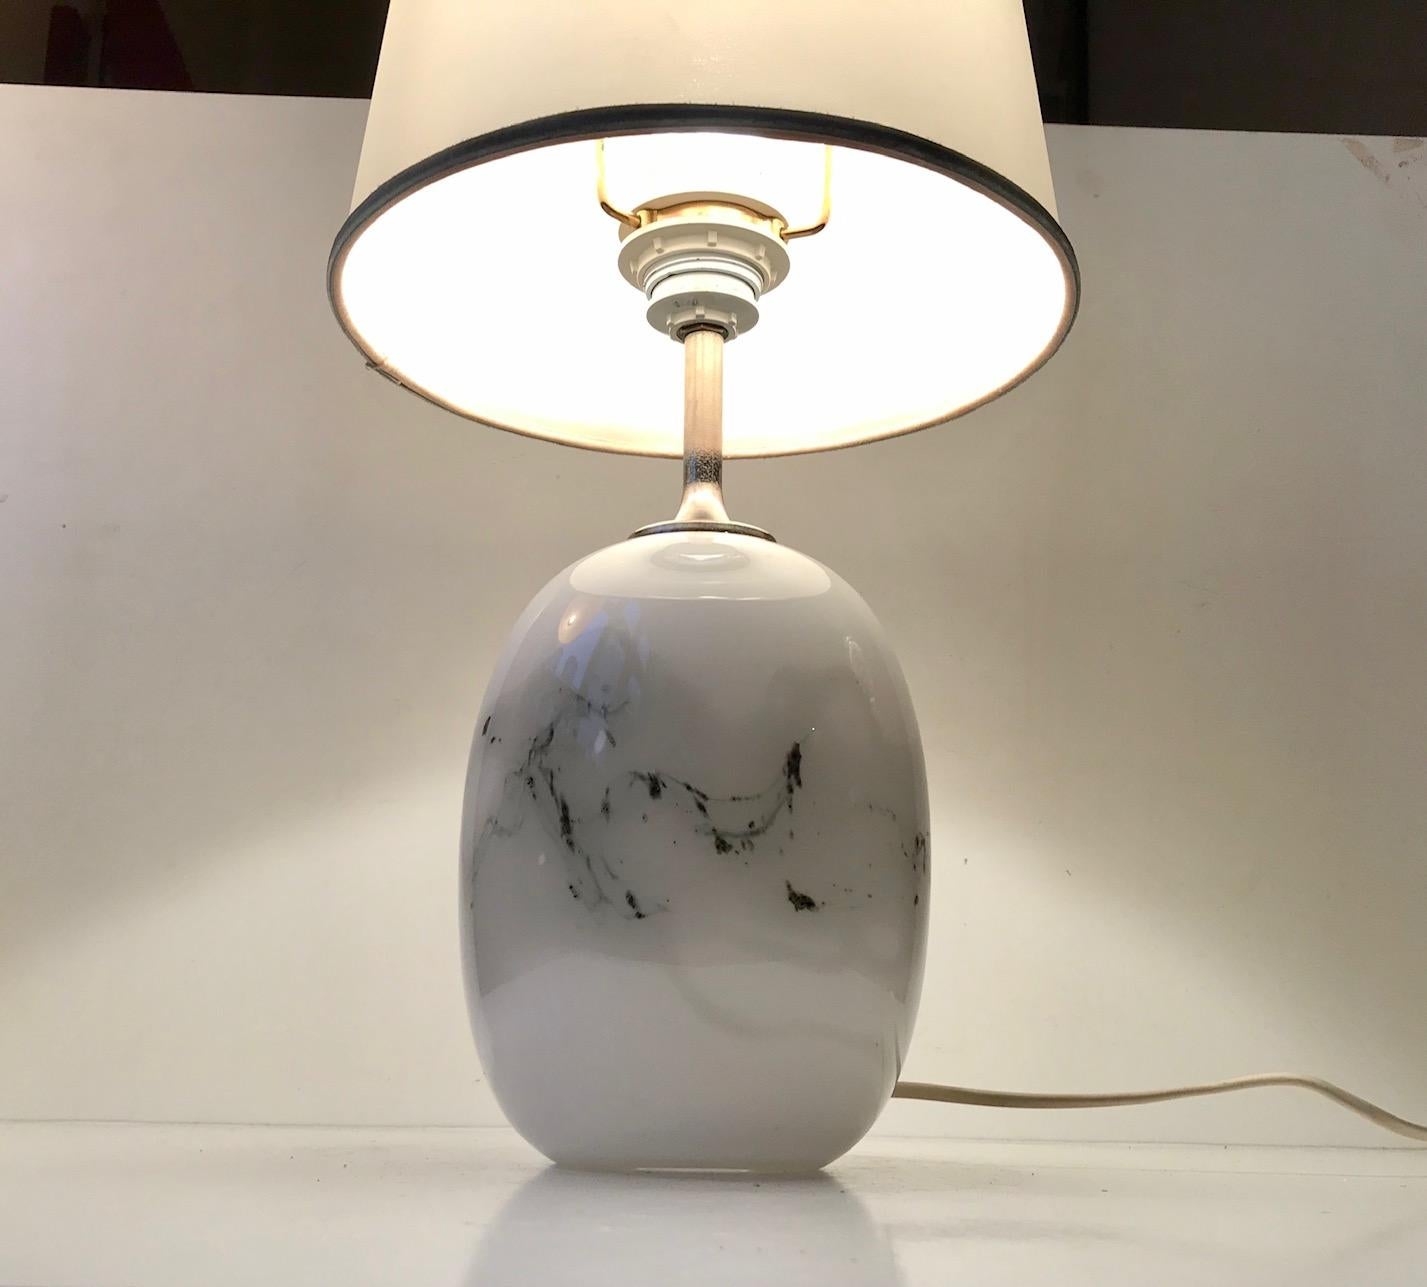 Ovoid shaped art glass table lamp designed by Michael Bang and manufactured by Holmegaard in Denmark during the late 1970. It is called Sakura. Label from Holmegaard still present beneath the base. The shade holder is included. The shade is not